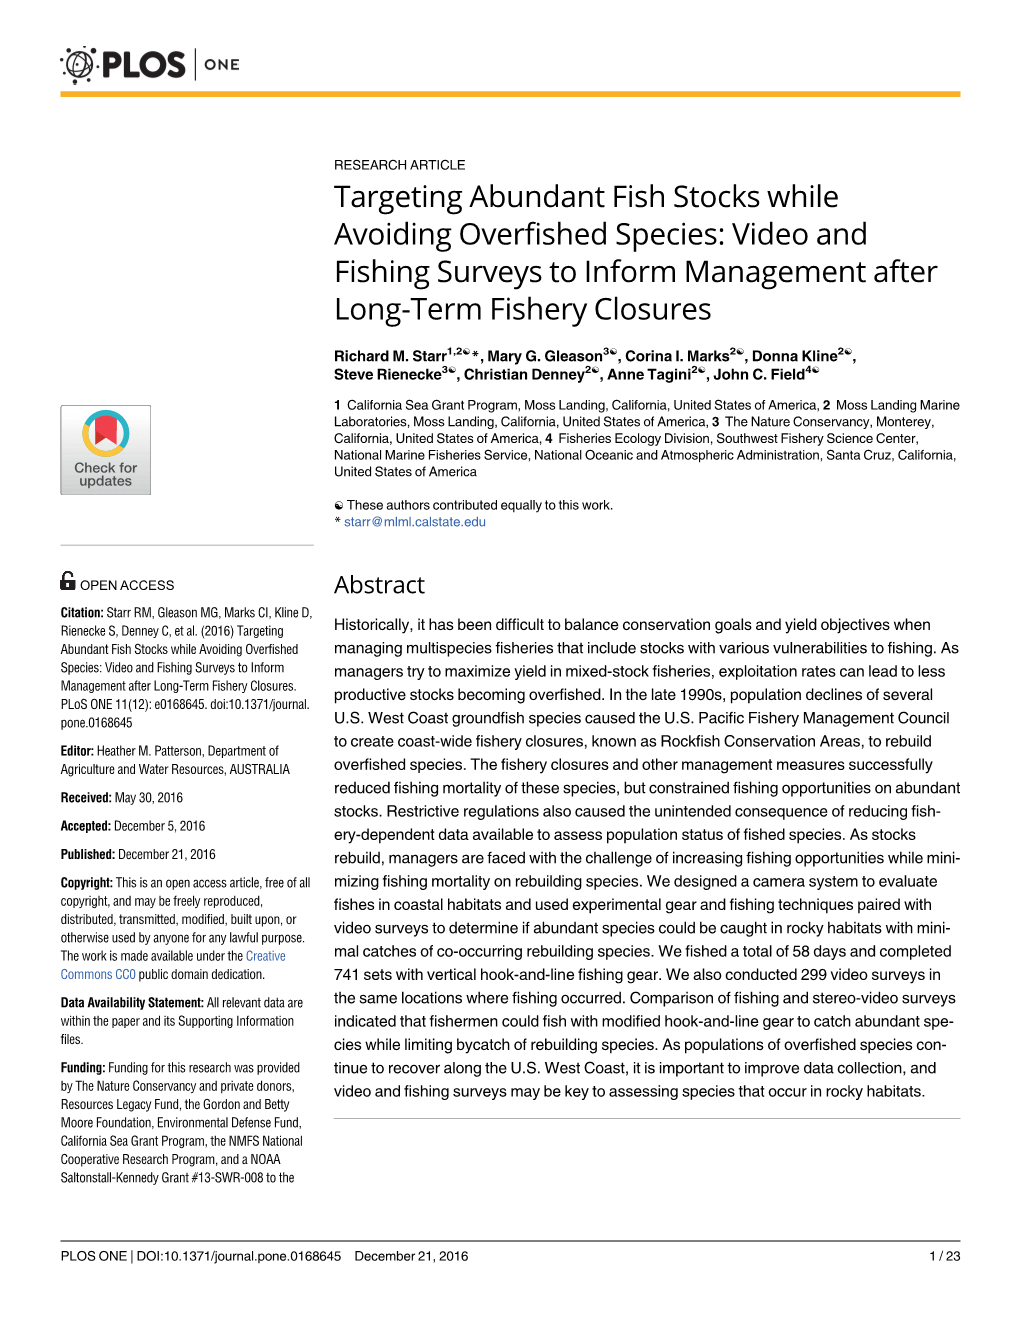 Targeting Abundant Fish Stocks While Avoiding Overfished Species: Video and Fishing Surveys to Inform Management After Long-Term Fishery Closures